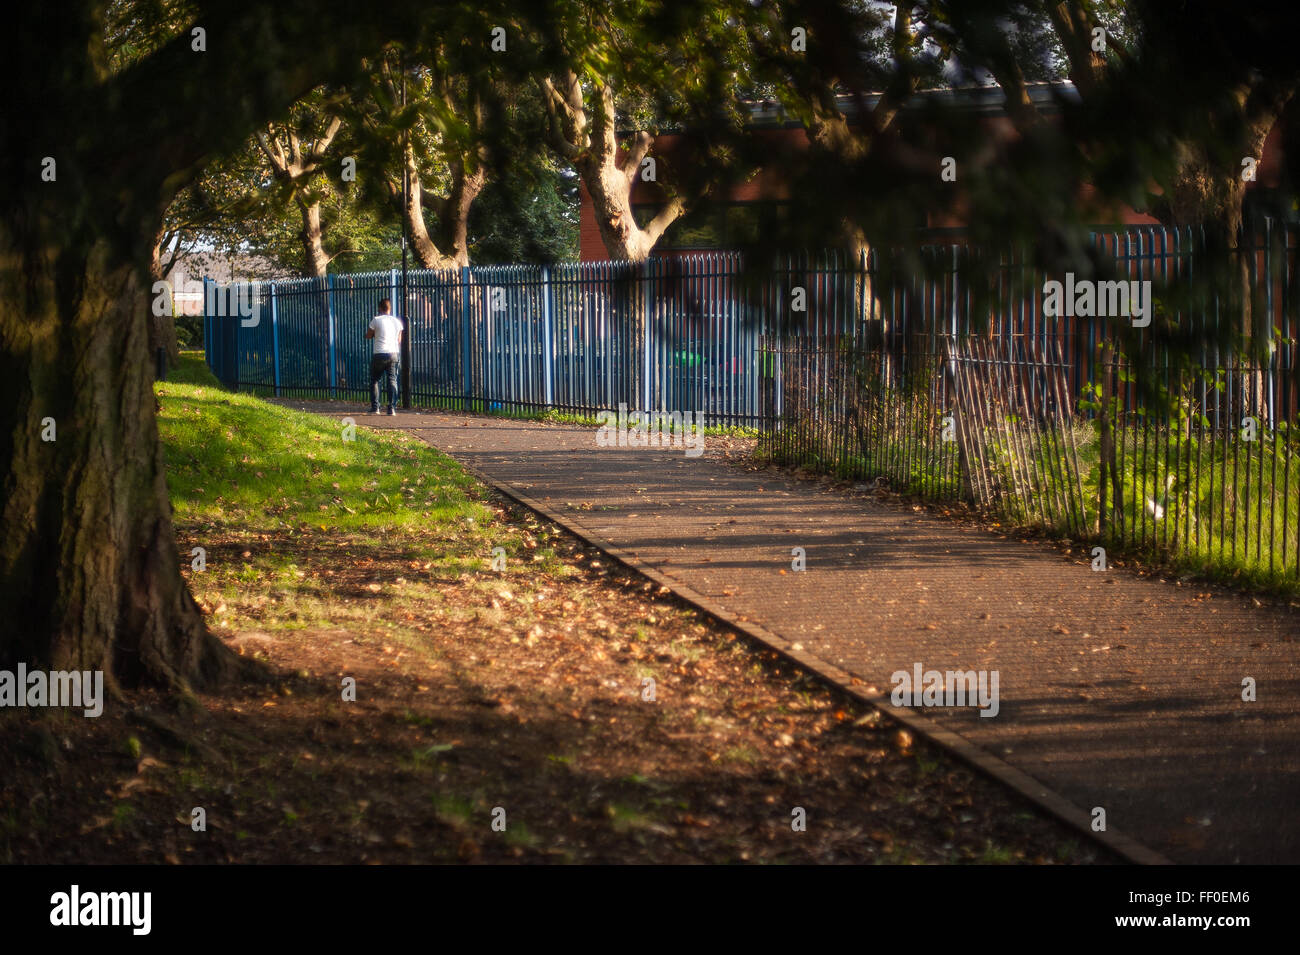 Late afternoon in Downhills Park, Tottenham, London, UK Stock Photo